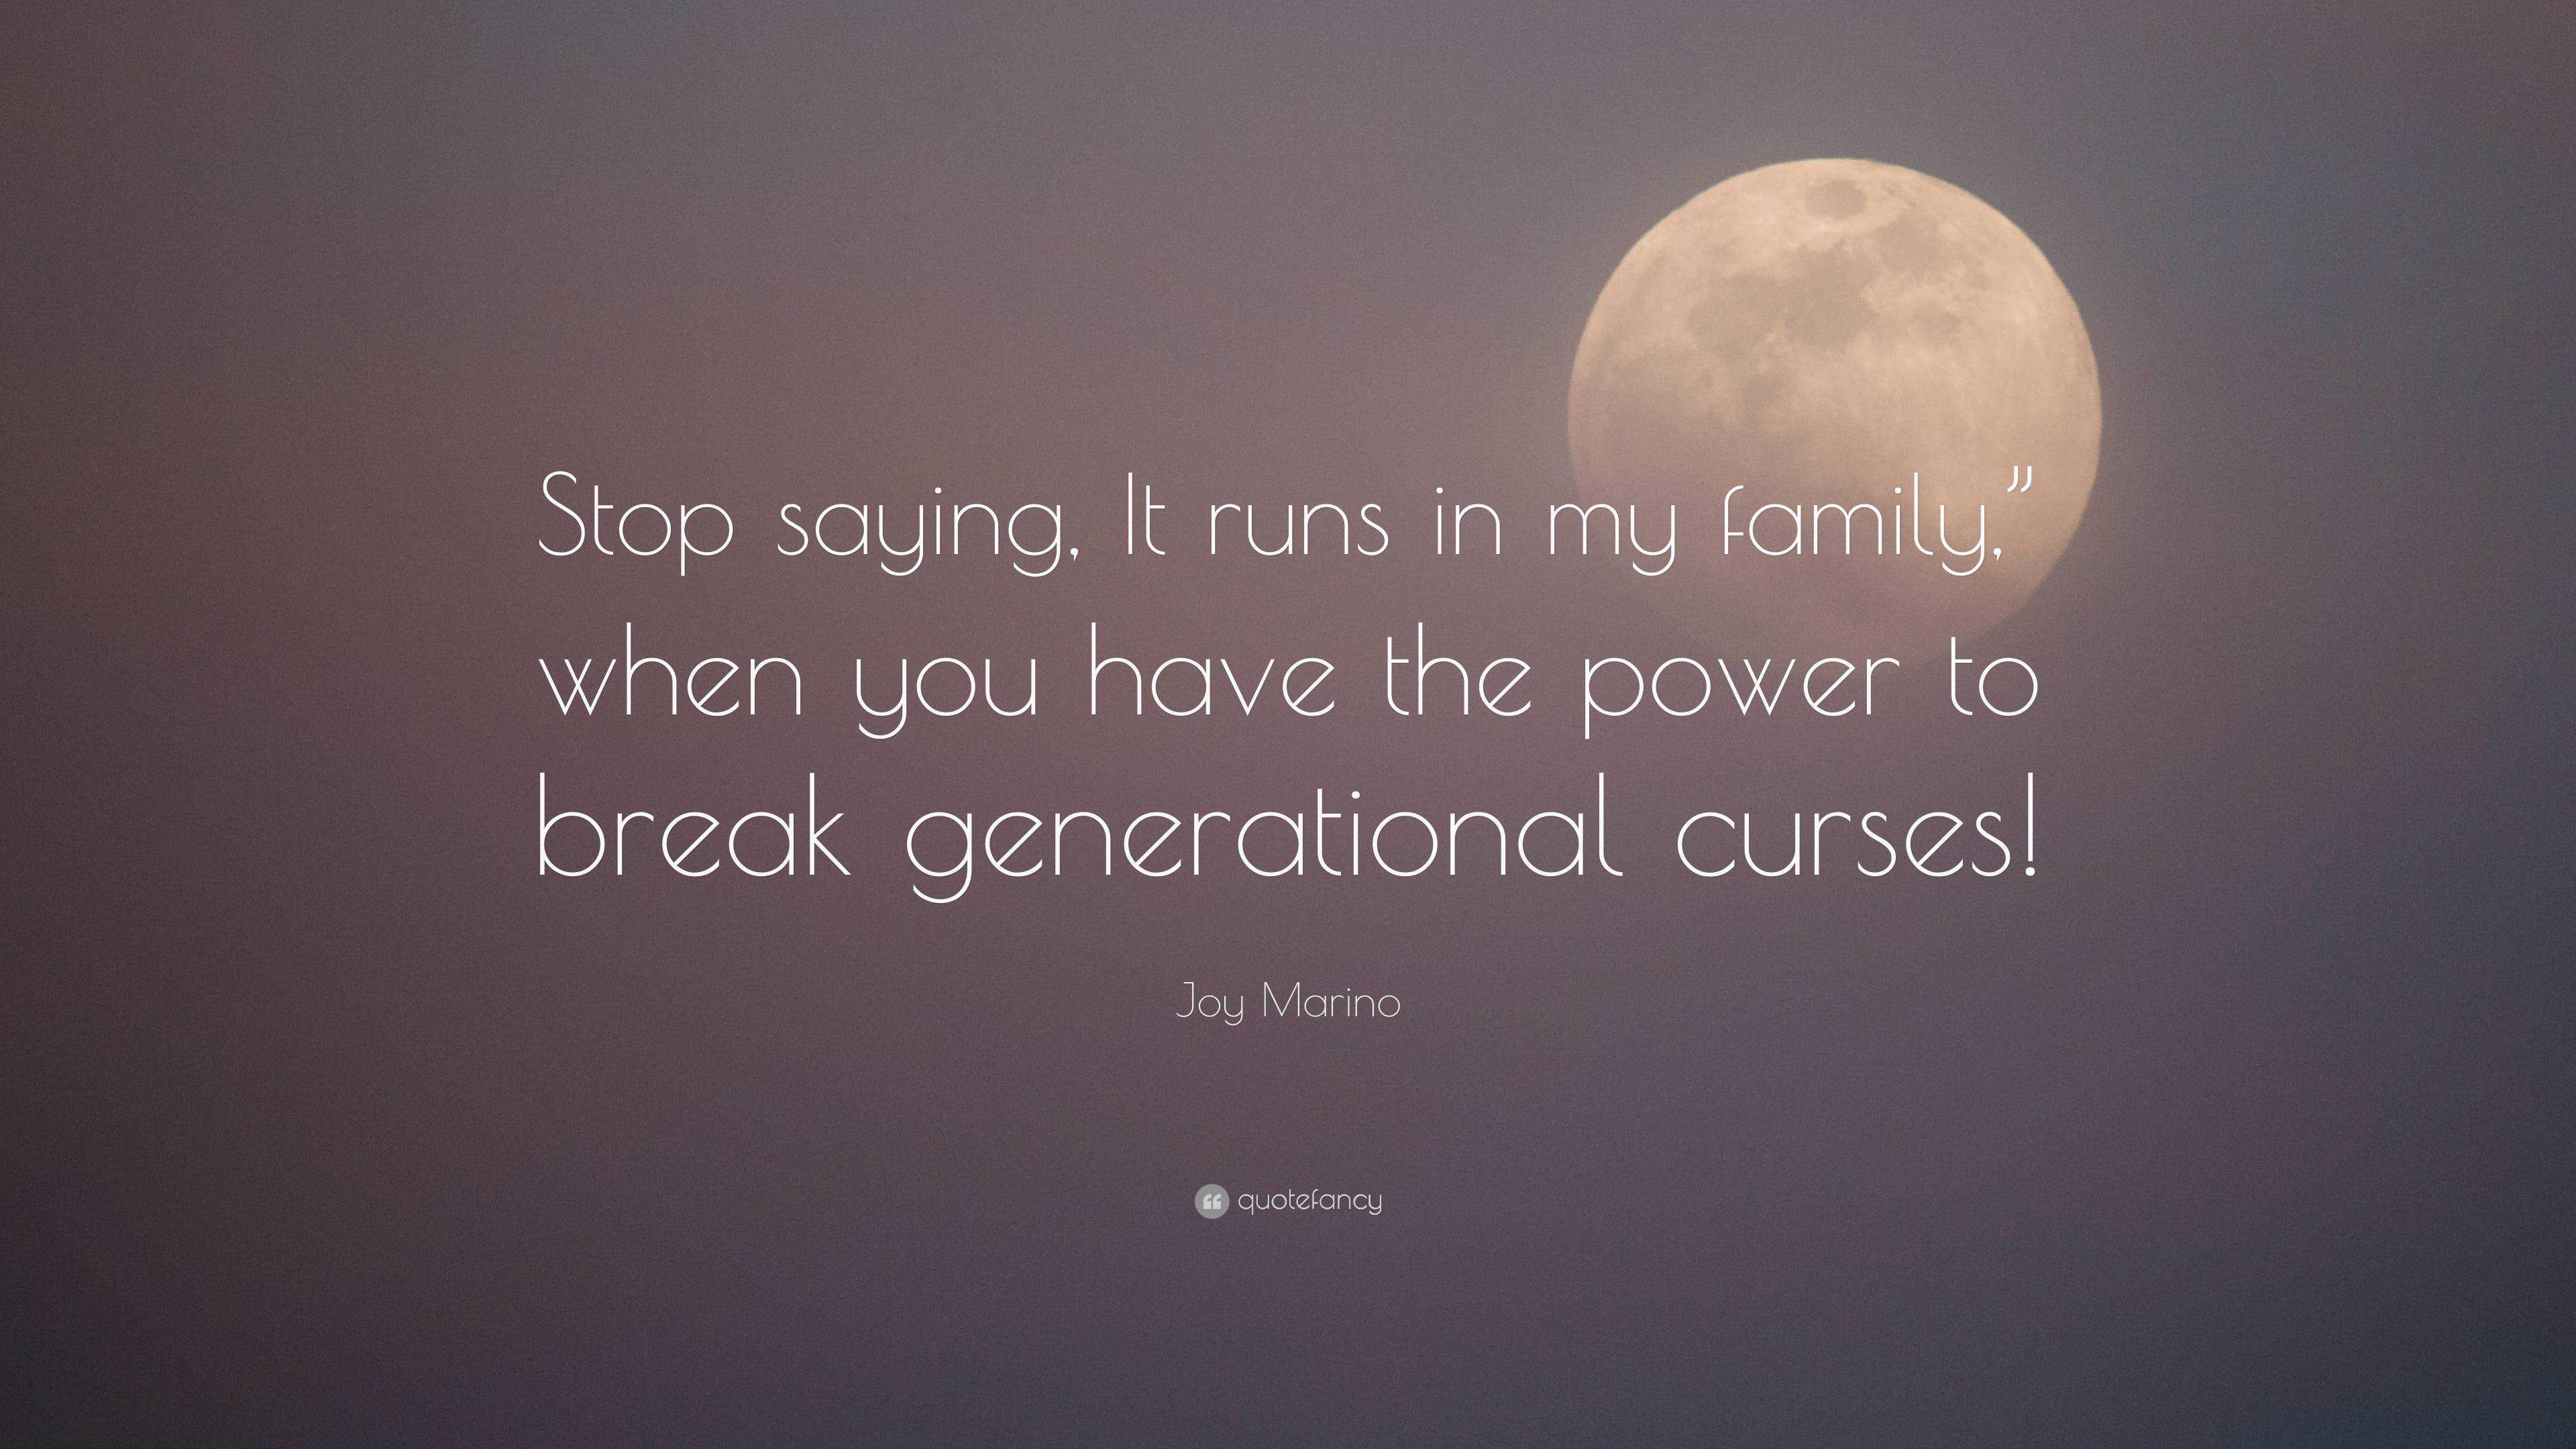 Joy Marino Quote: “Stop Saying, It Runs In My Family,” When You Have The Power To